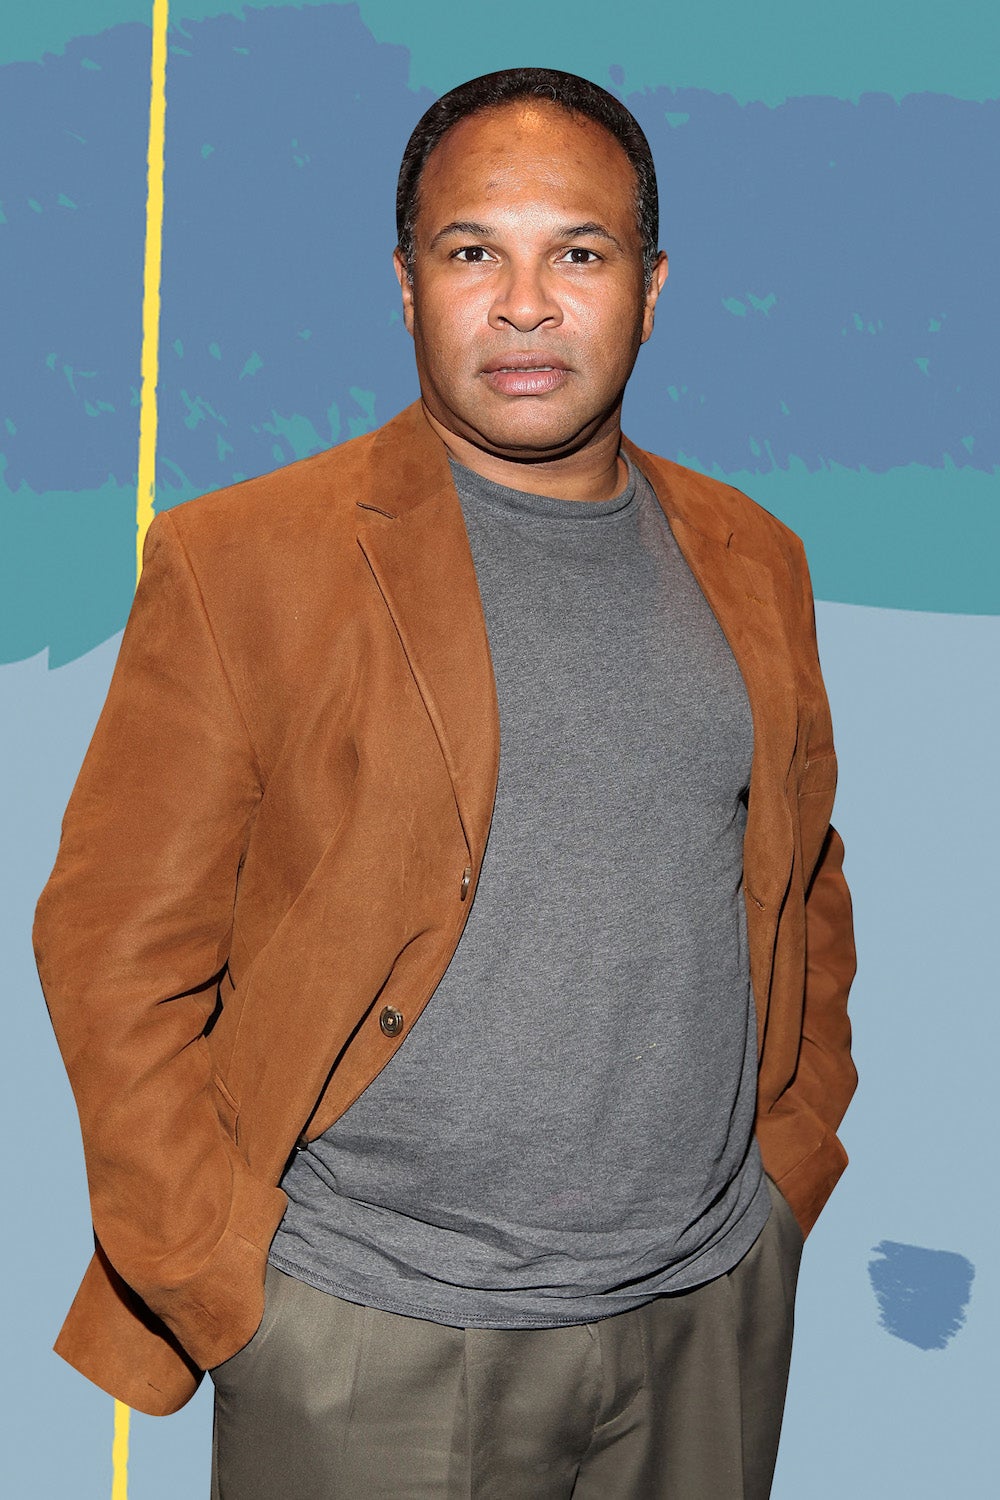 Geoffrey Owens Books Another Acting Gig Thanks To Viral Photo ...